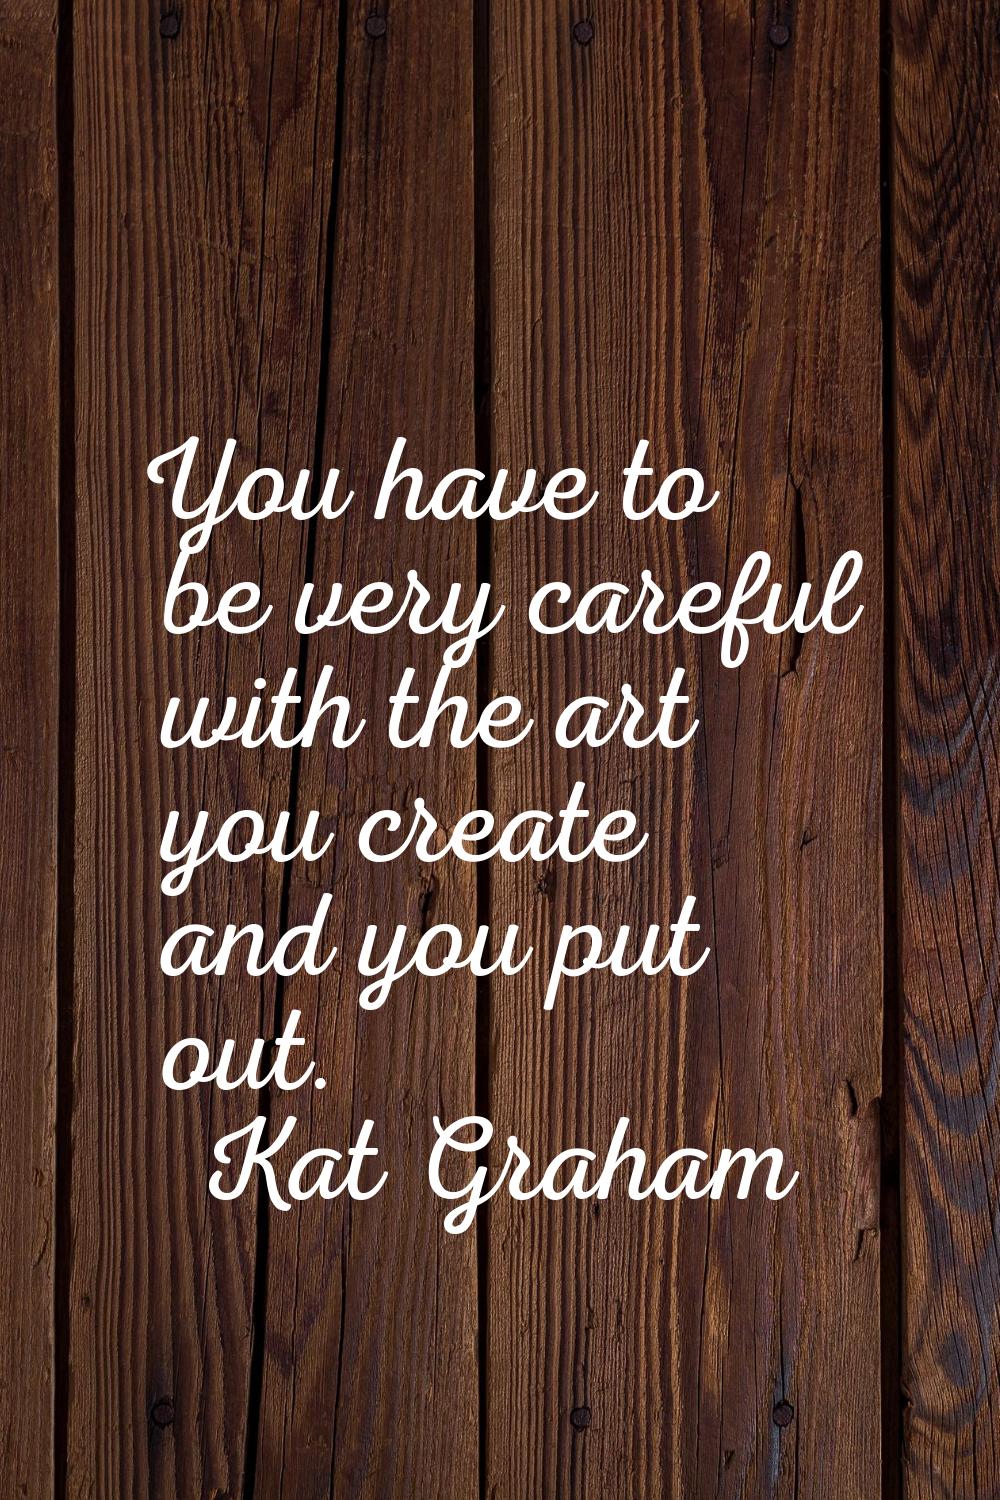 You have to be very careful with the art you create and you put out.